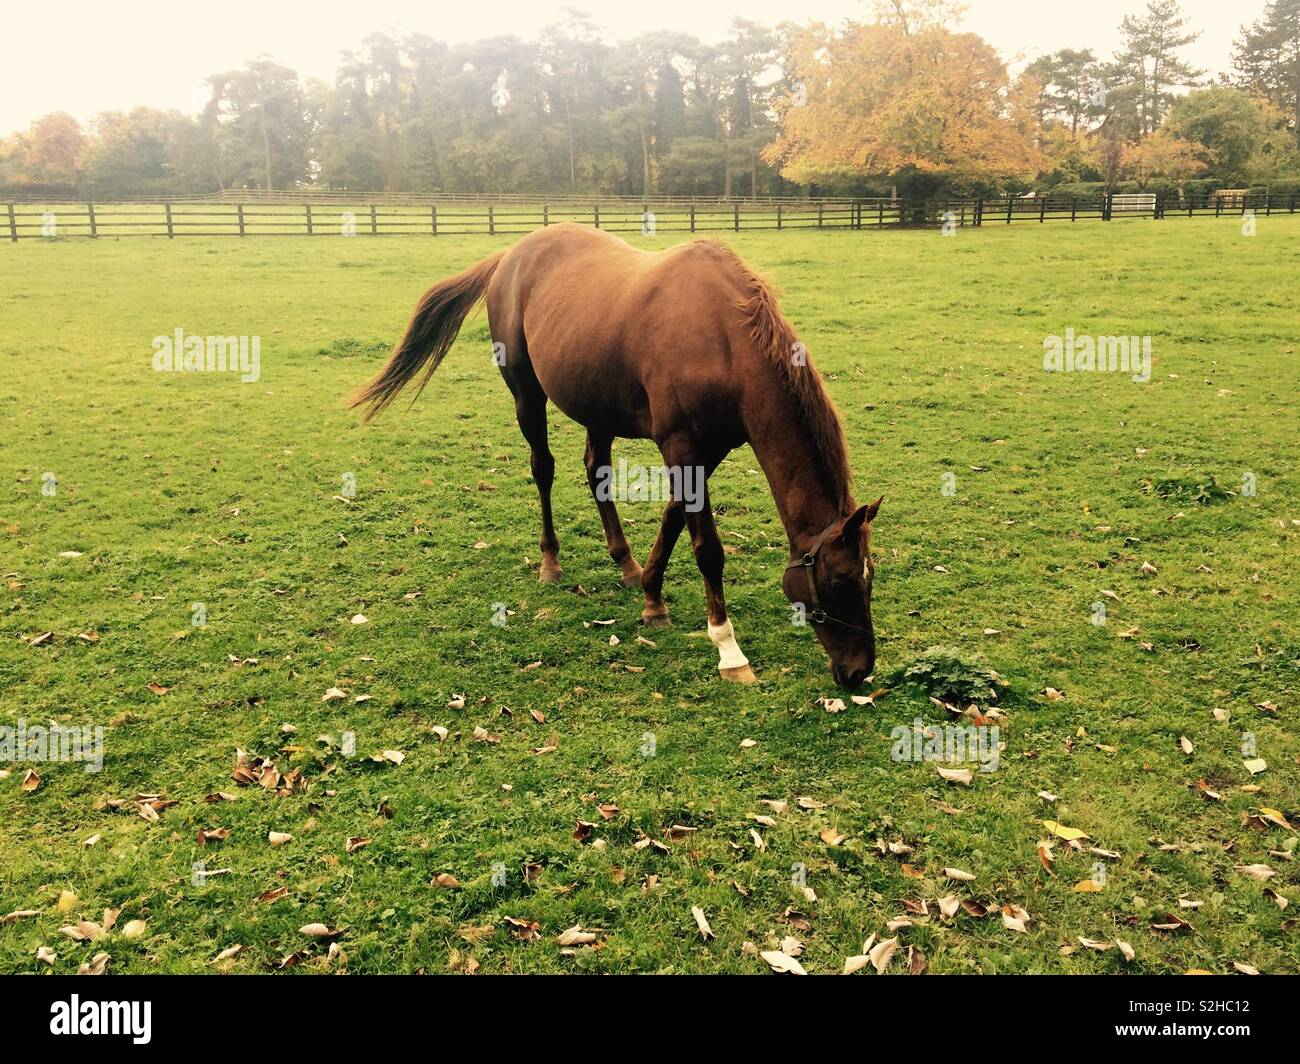 Thoroughbred racehorse grazing in paddock during Autumn Stock Photo